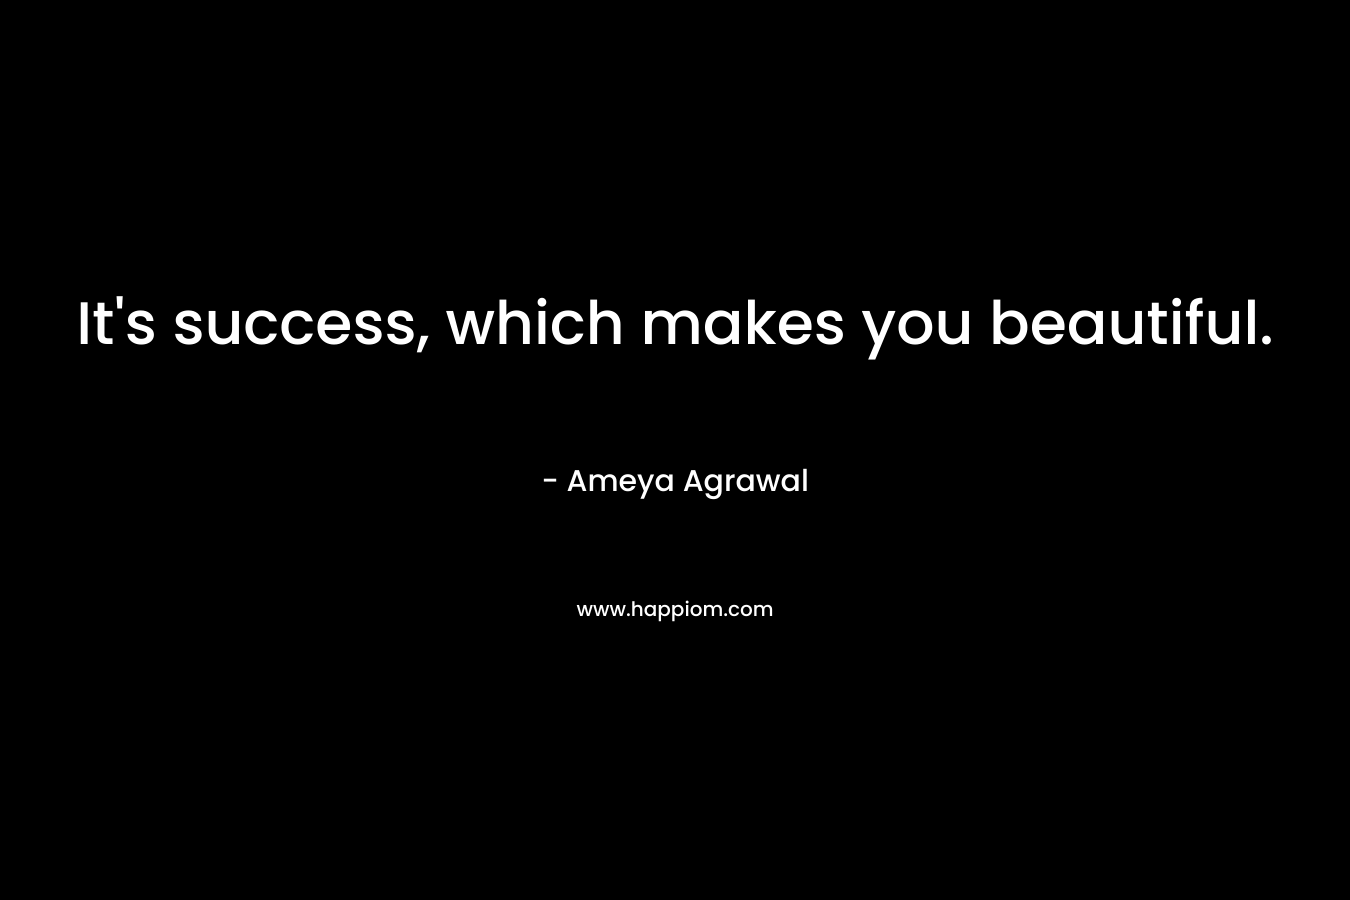 It’s success, which makes you beautiful. – Ameya Agrawal